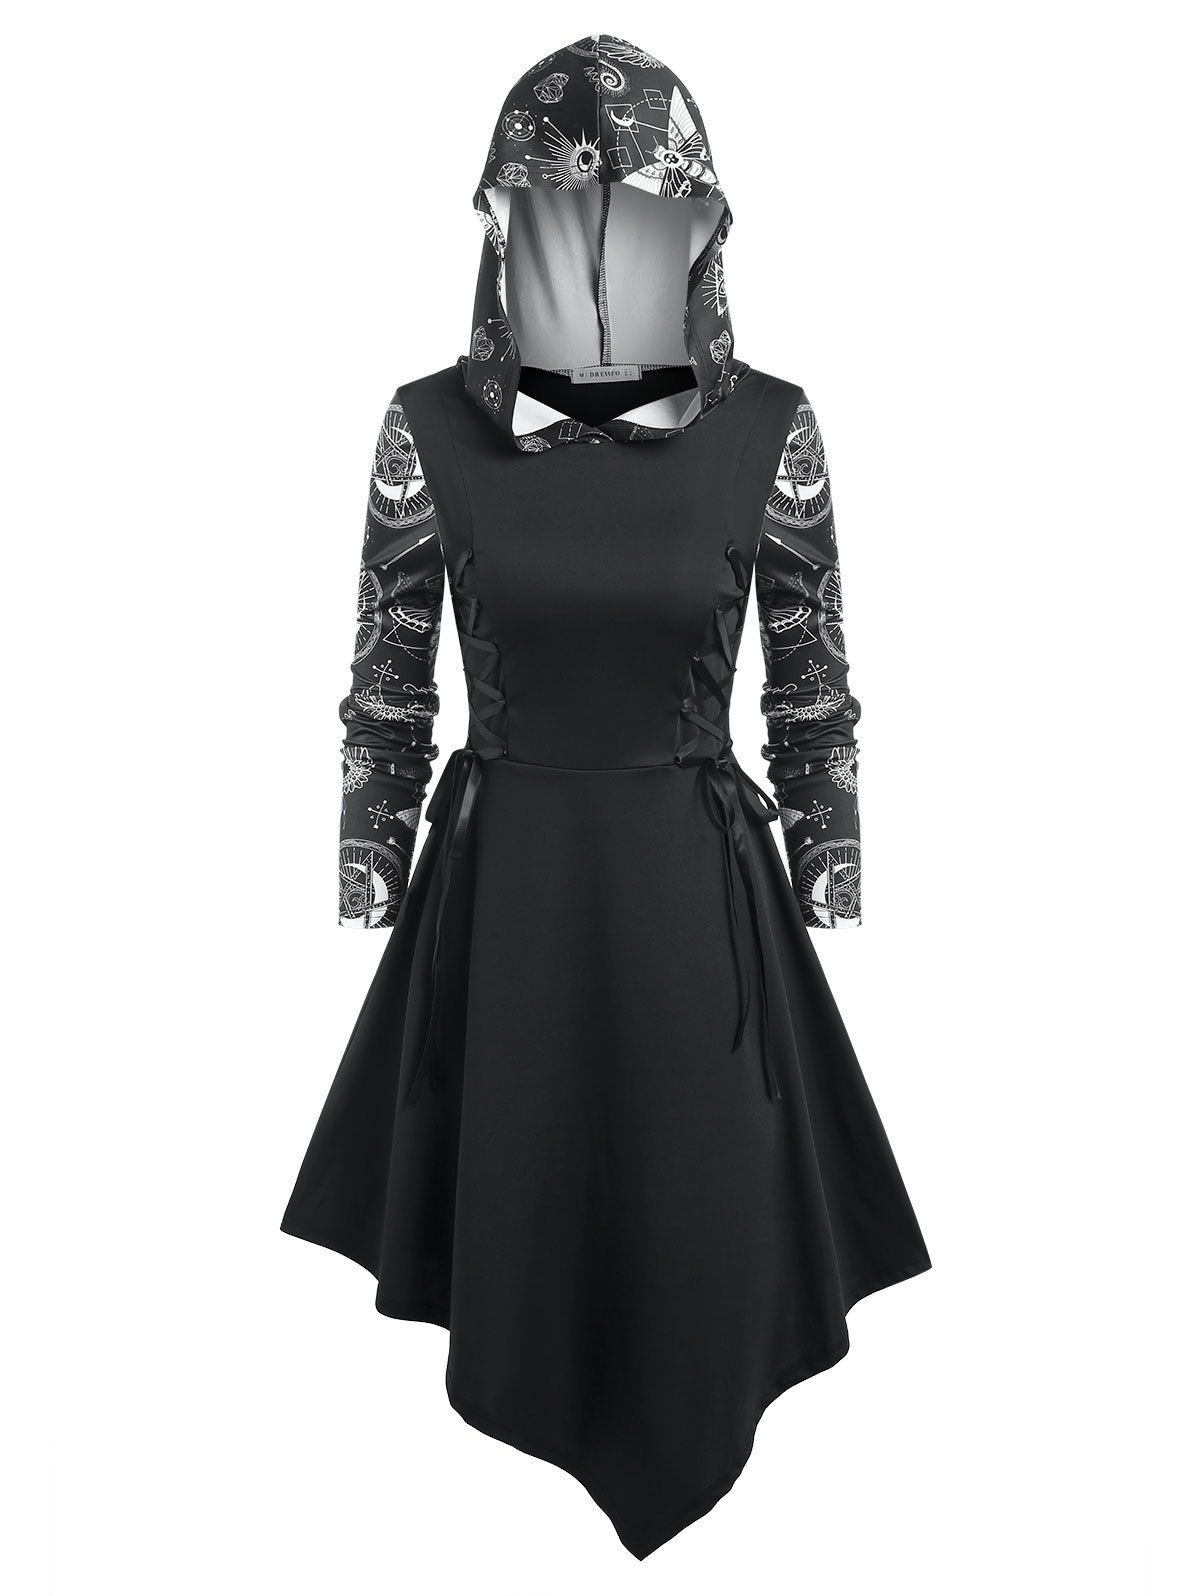 Gothic Asymmetrical Printed Lace Up Hooded Midi Casual Dress - BLACK M